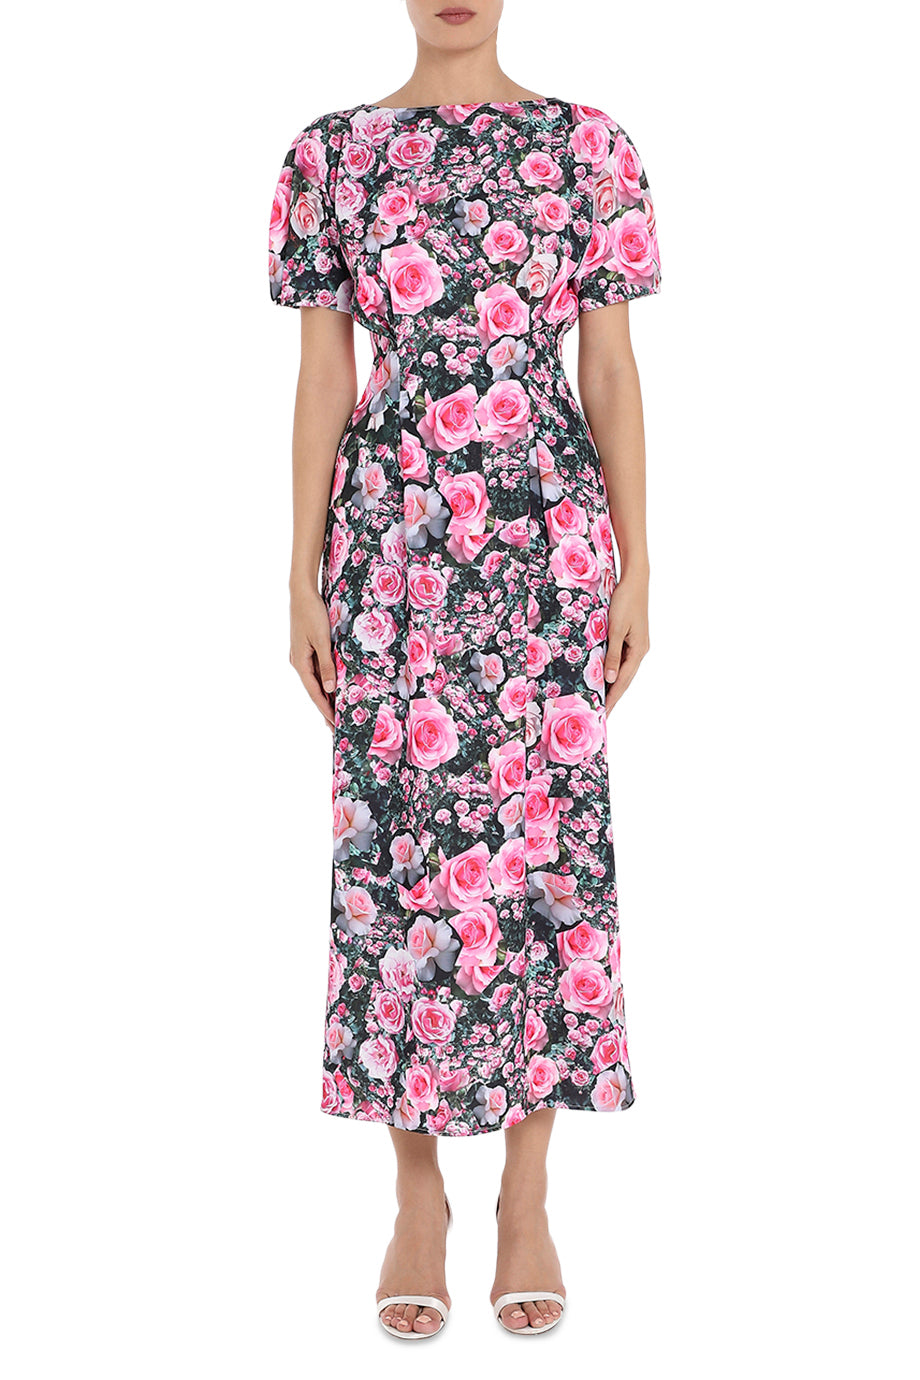 Christopher Kane The Rose Garden Midi Dress in Pink. Front view. Shop from Etoile La Boutique.